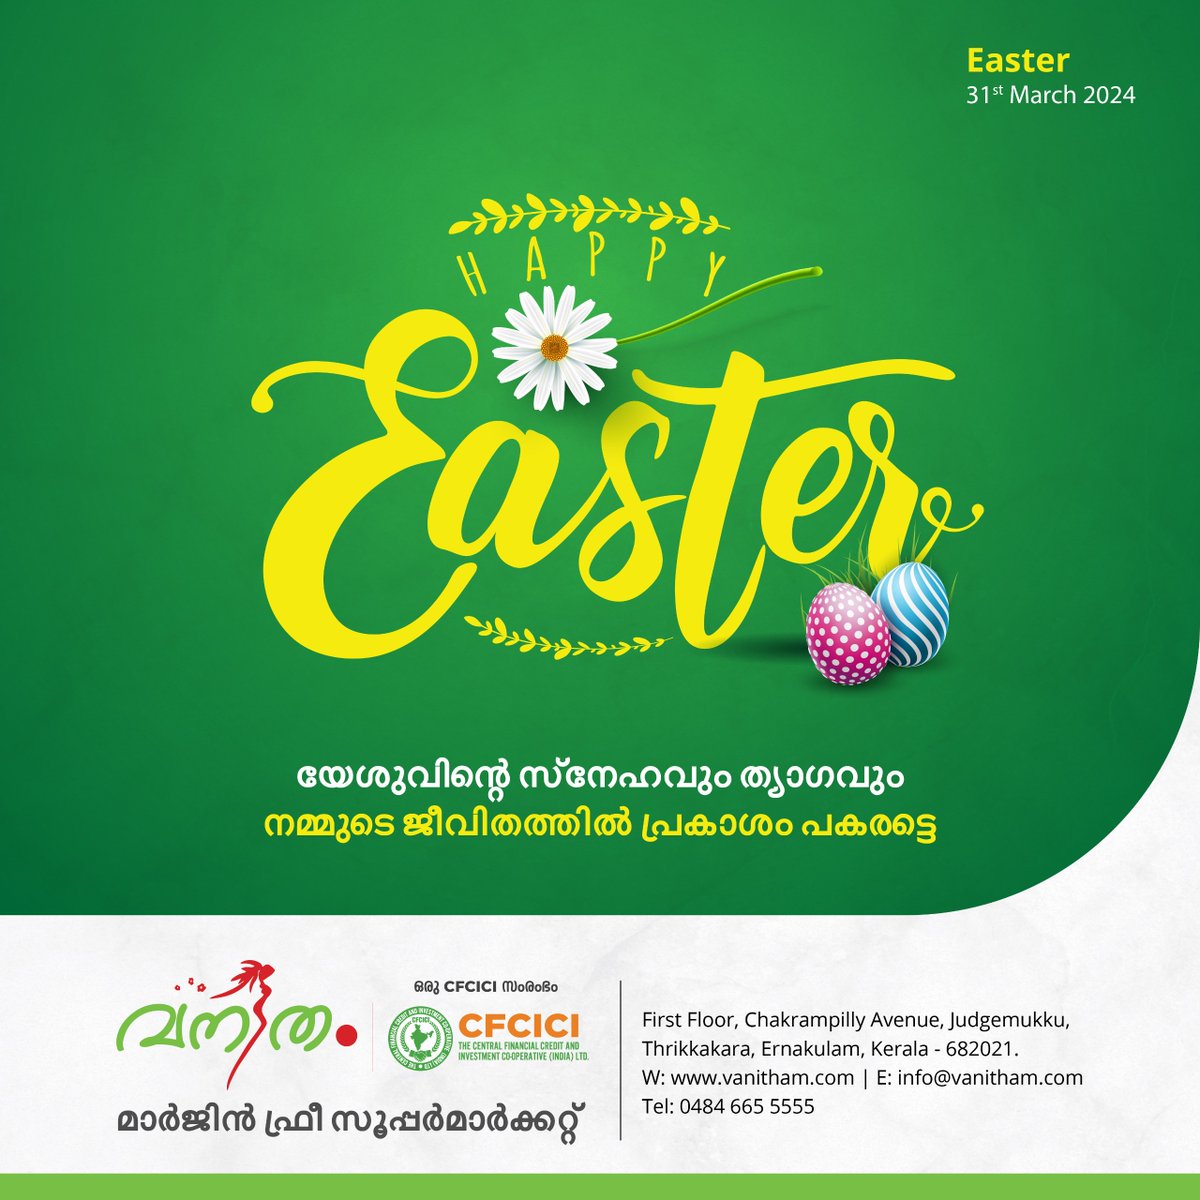 Celebrate the essence of Easter with Vanitham Supermarket, as we reflect on renewal and hope. Let this festive season rekindle joy in your hearts and bring fresh beginnings to life. 

എല്ലാവര്ക്കും ഹാപ്പി ഈസ്റ്റർ! 🌼🐣 

#VanithamSupermarket #CFCICI #Easter #NewStarts #EasterJoy